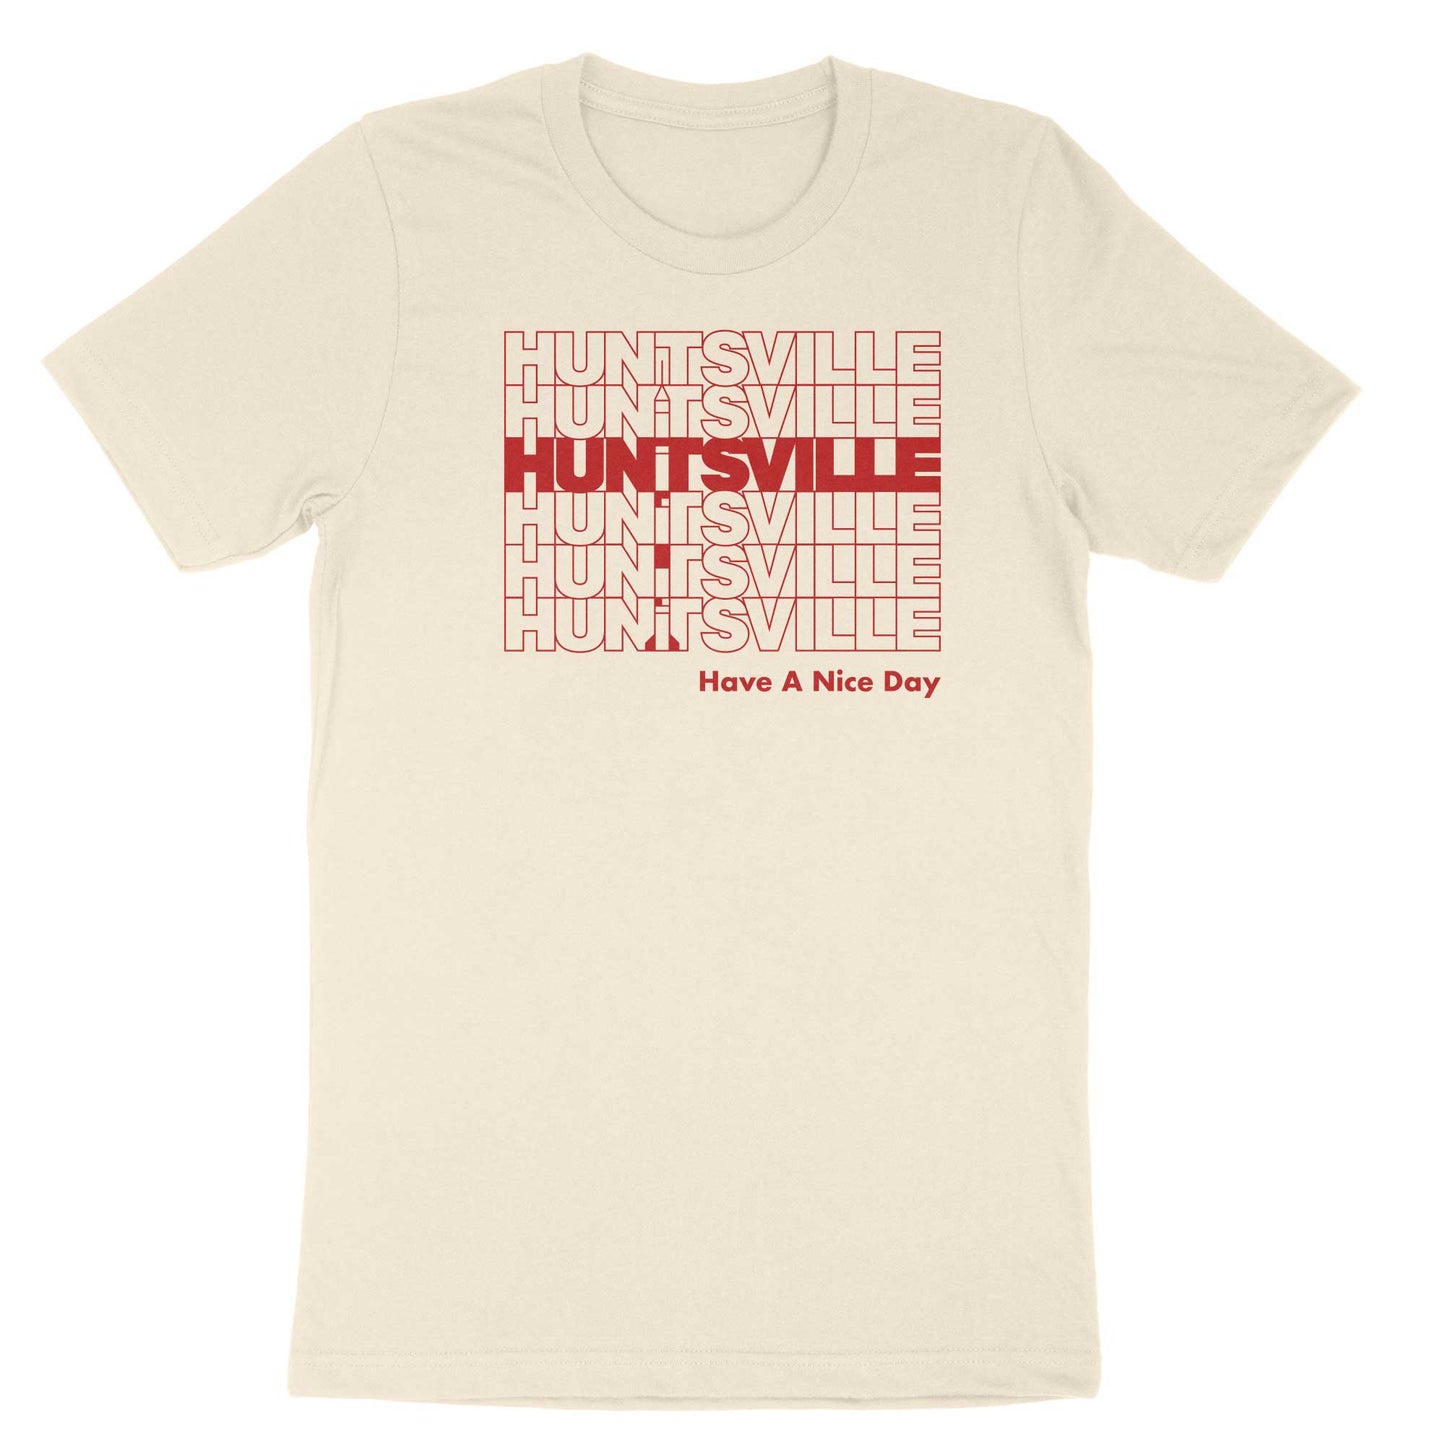 Image of red text "Huntsville Have a Nice Day" on white shirt